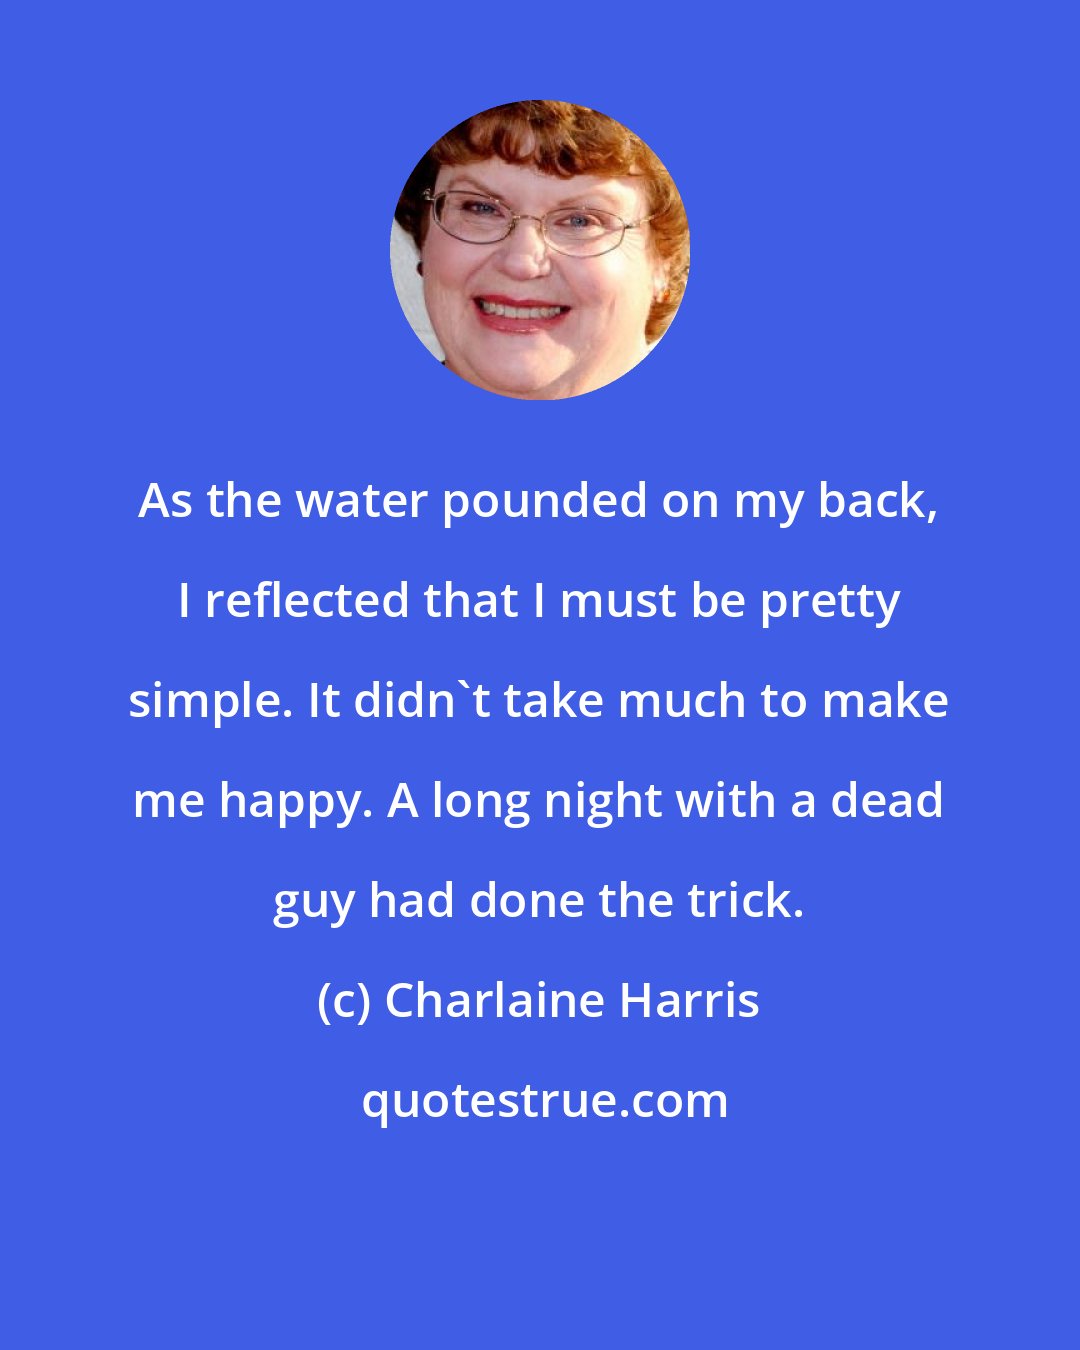 Charlaine Harris: As the water pounded on my back, I reflected that I must be pretty simple. It didn't take much to make me happy. A long night with a dead guy had done the trick.